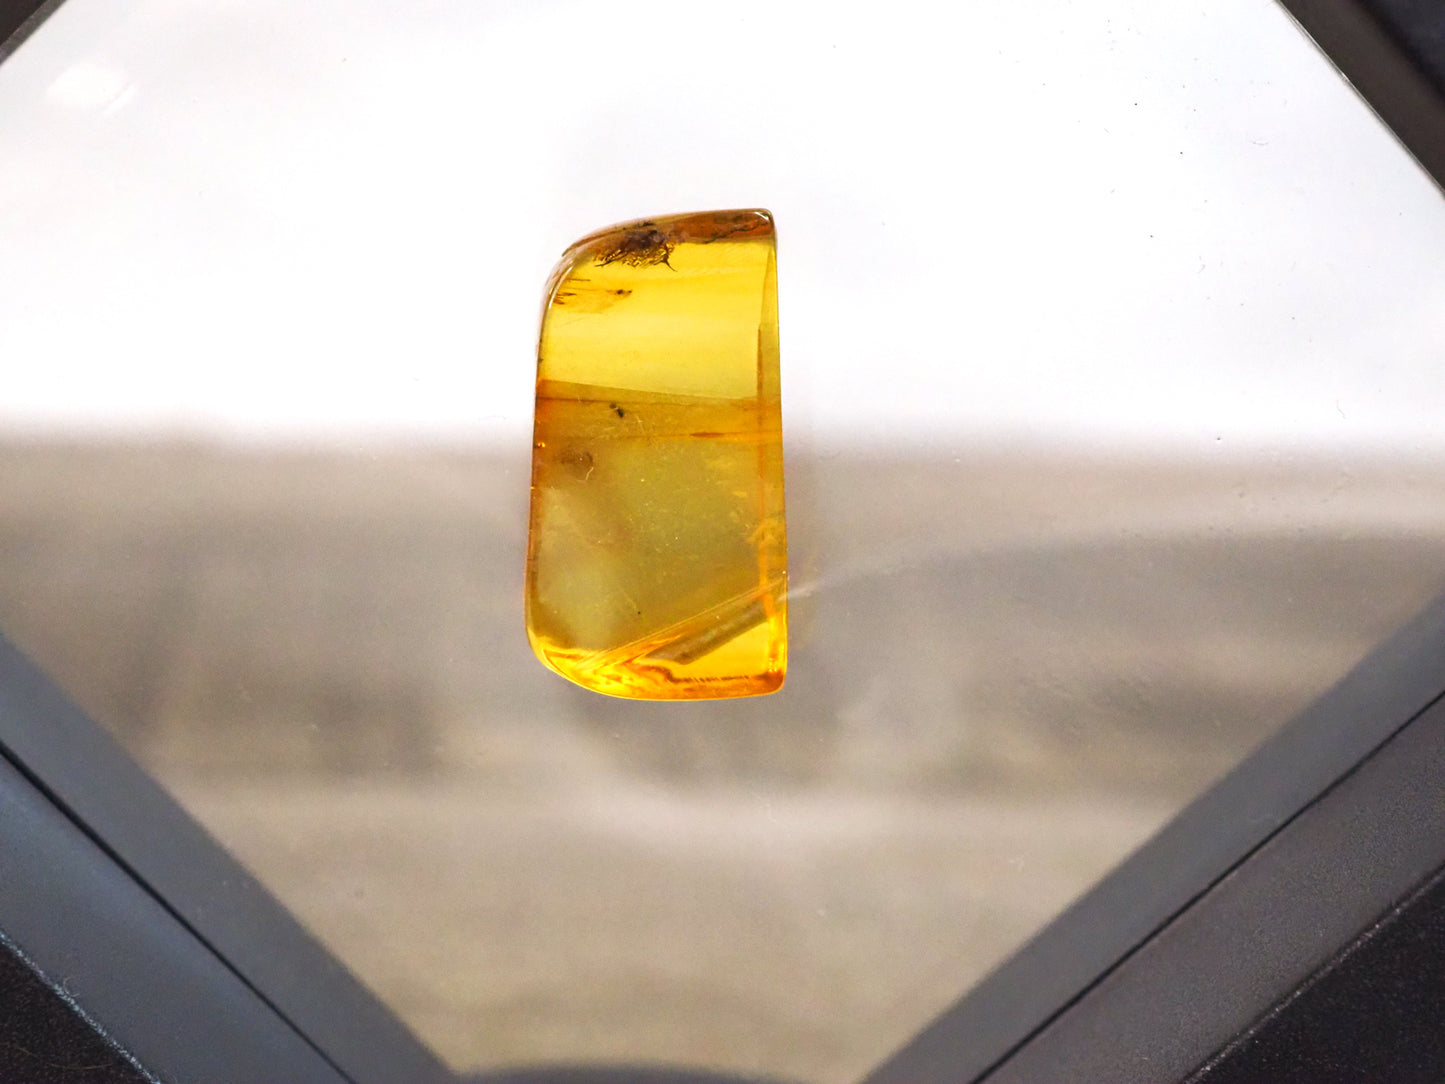 Baltic Amber E with Insect Inclusions